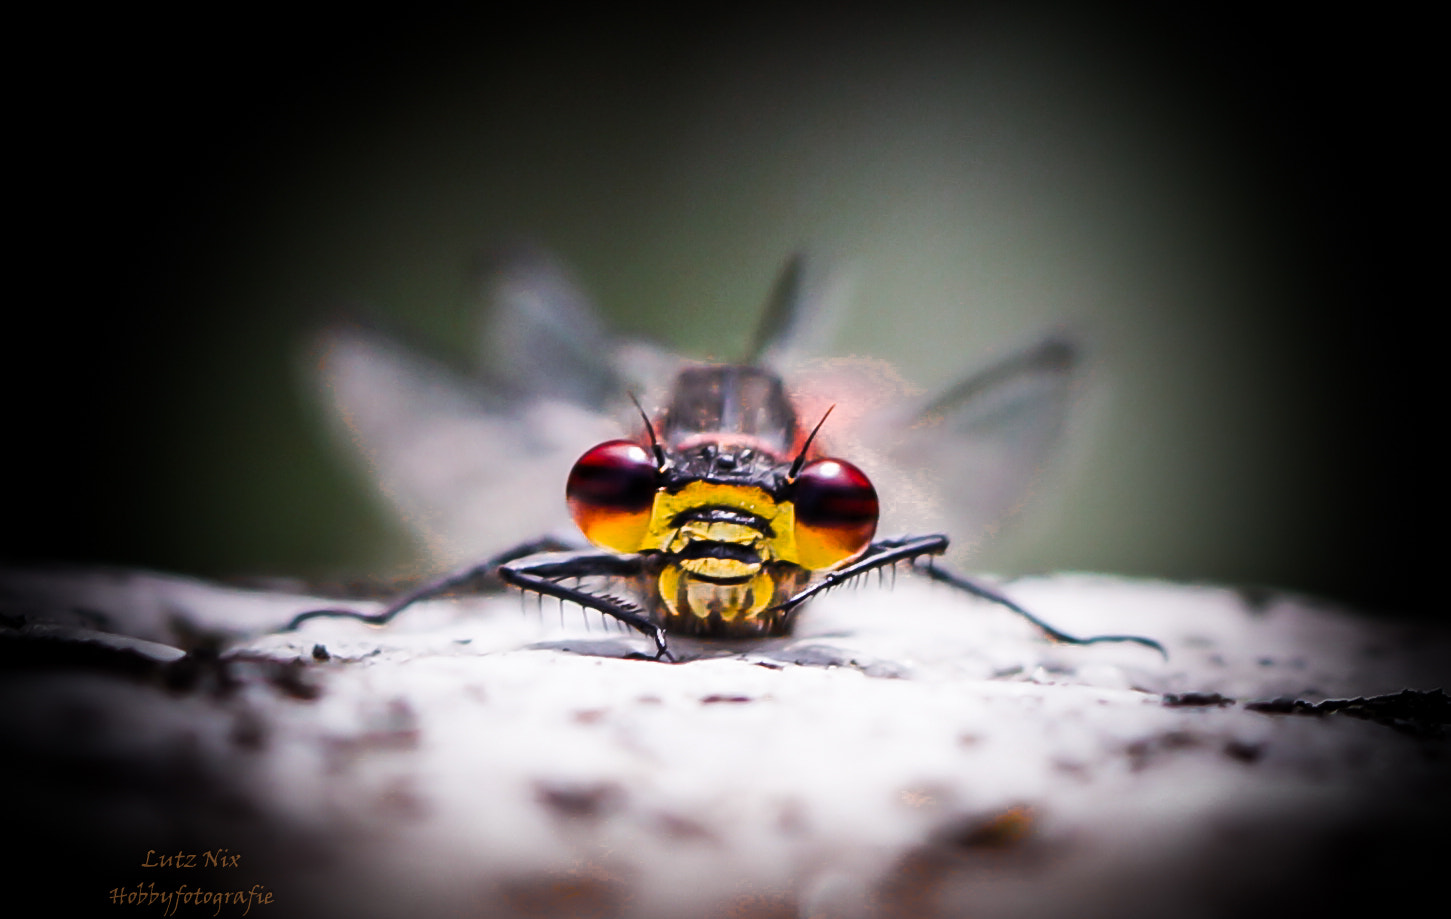 90mm F2.8 Macro SSM sample photo. Face to face with a dragonfly photography